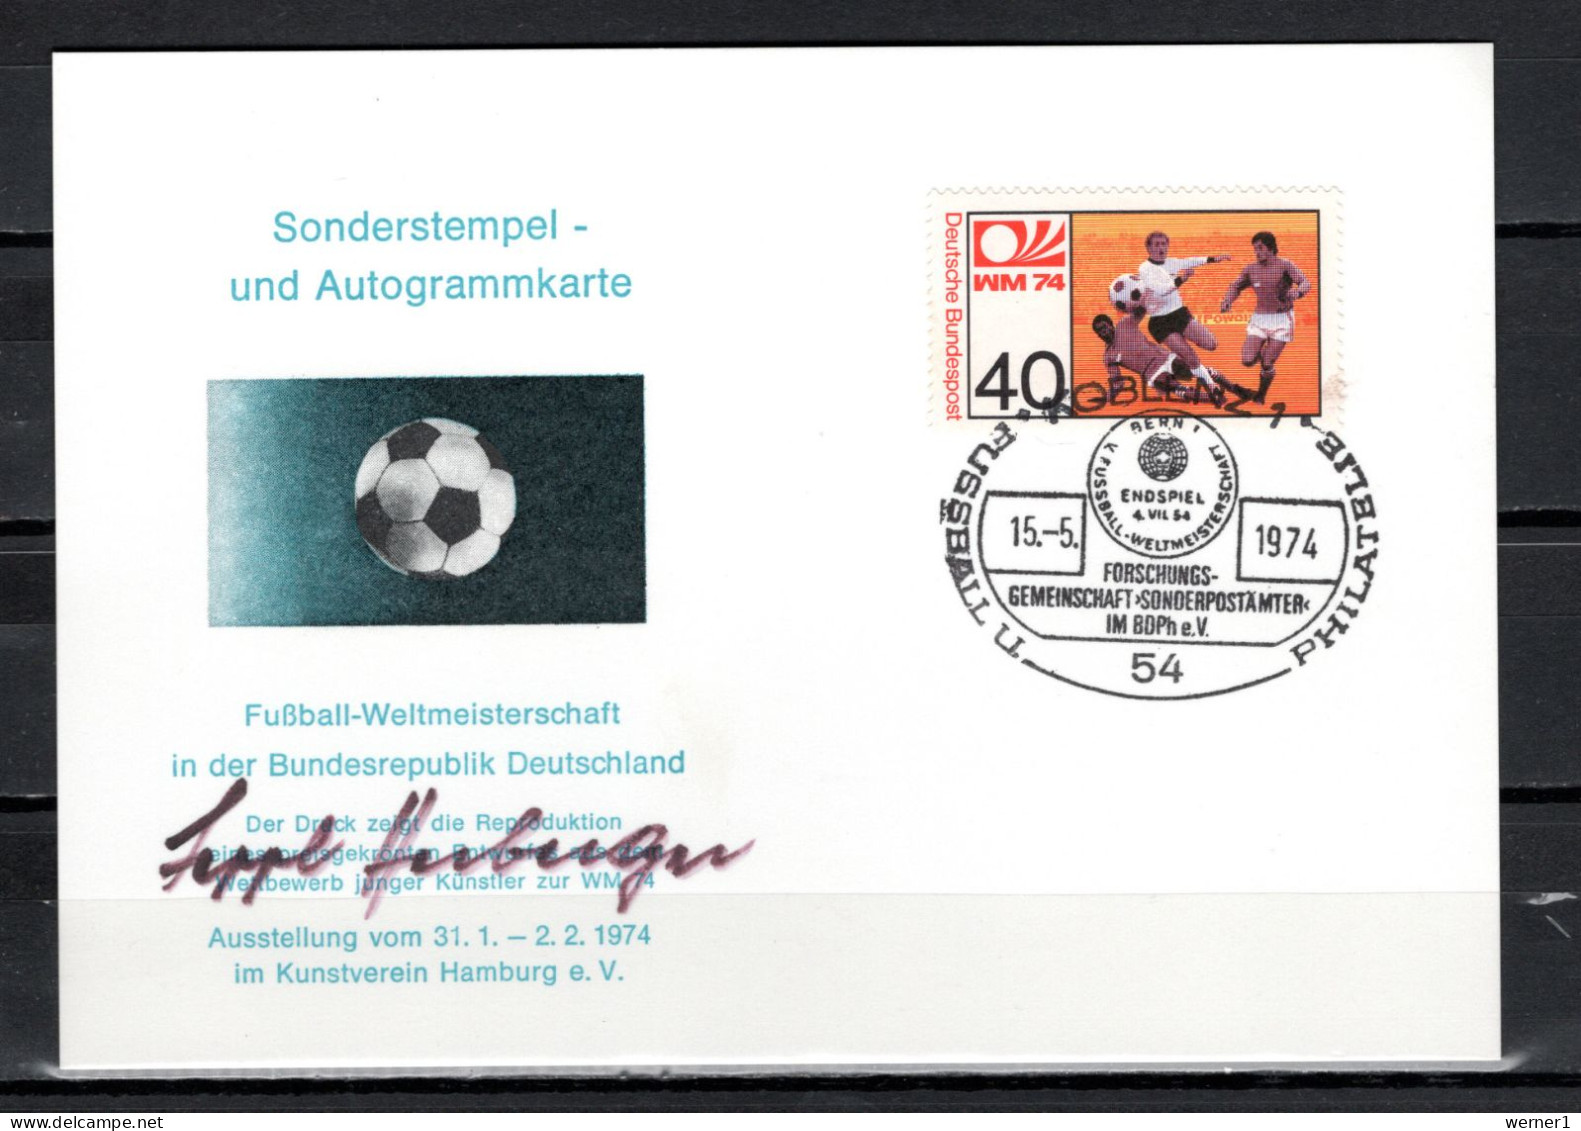 Germany 1974 Football Soccer World Cup Autograph Postcard With Original Signature Of Sepp Herberger - 1974 – West Germany